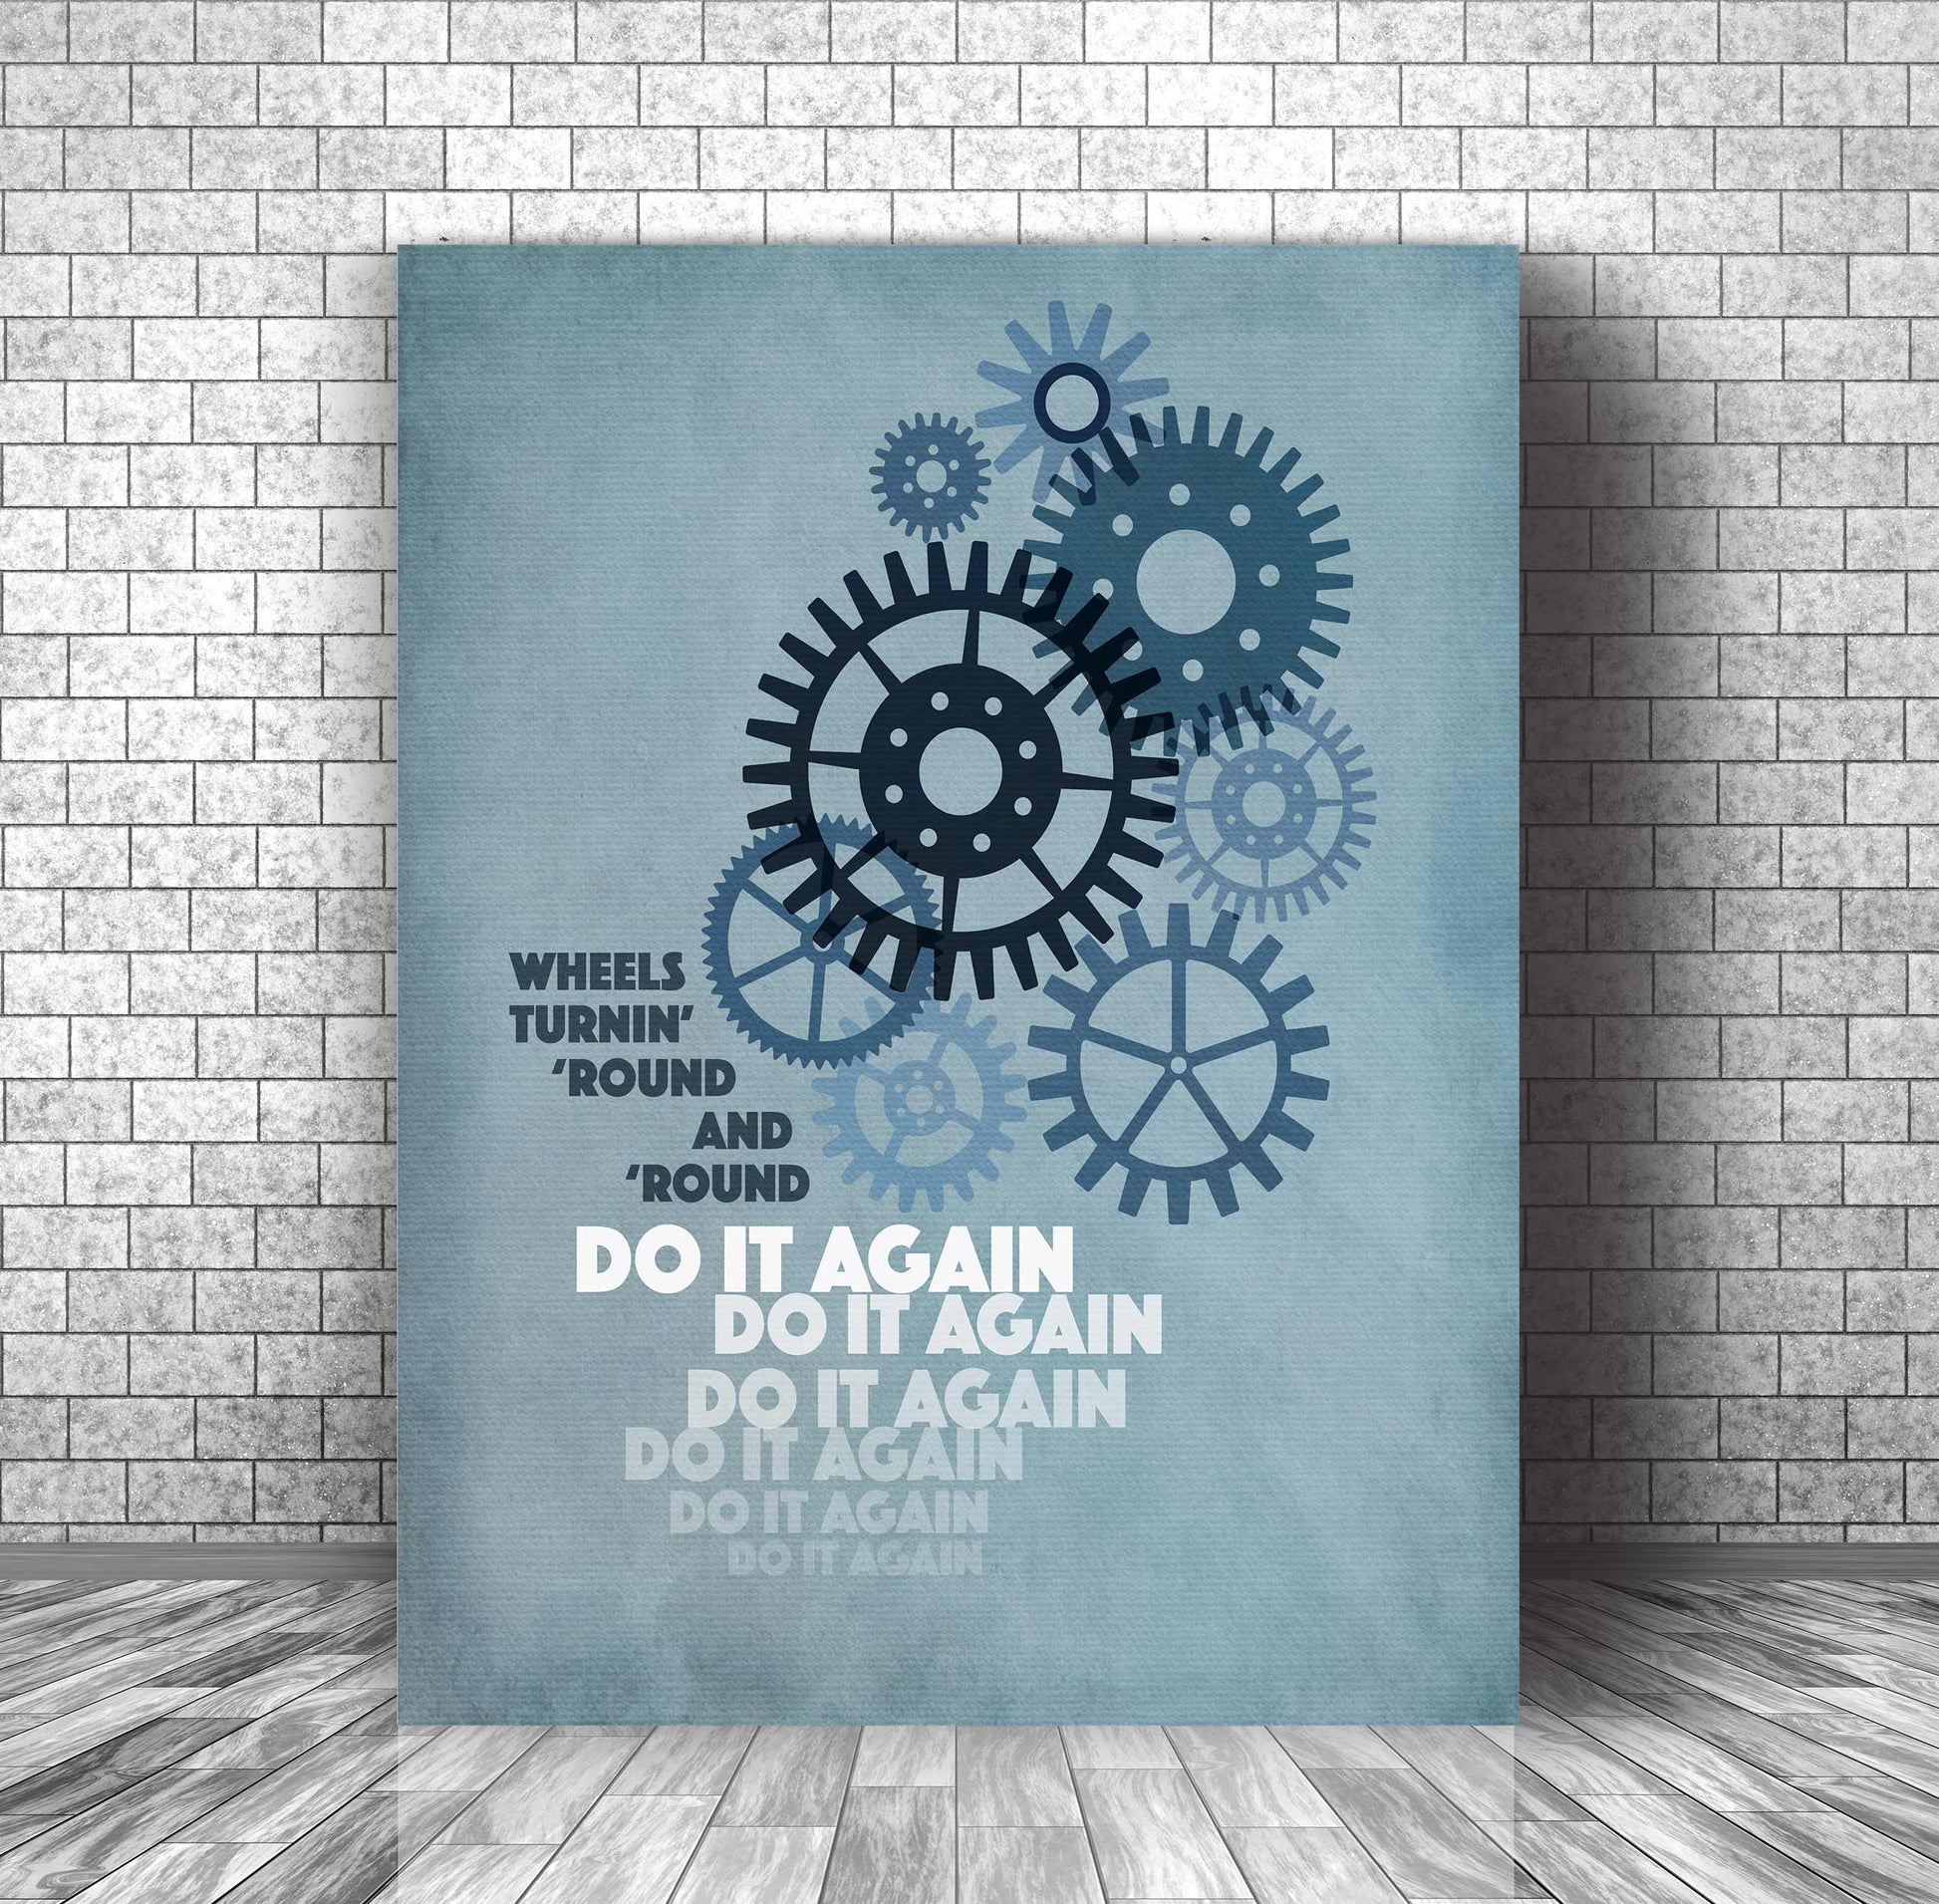 Do it Again by Steely Dan - Song Lyric 70s Music Print Art Song Lyrics Art Song Lyrics Art 11x14 Canvas Wrap 